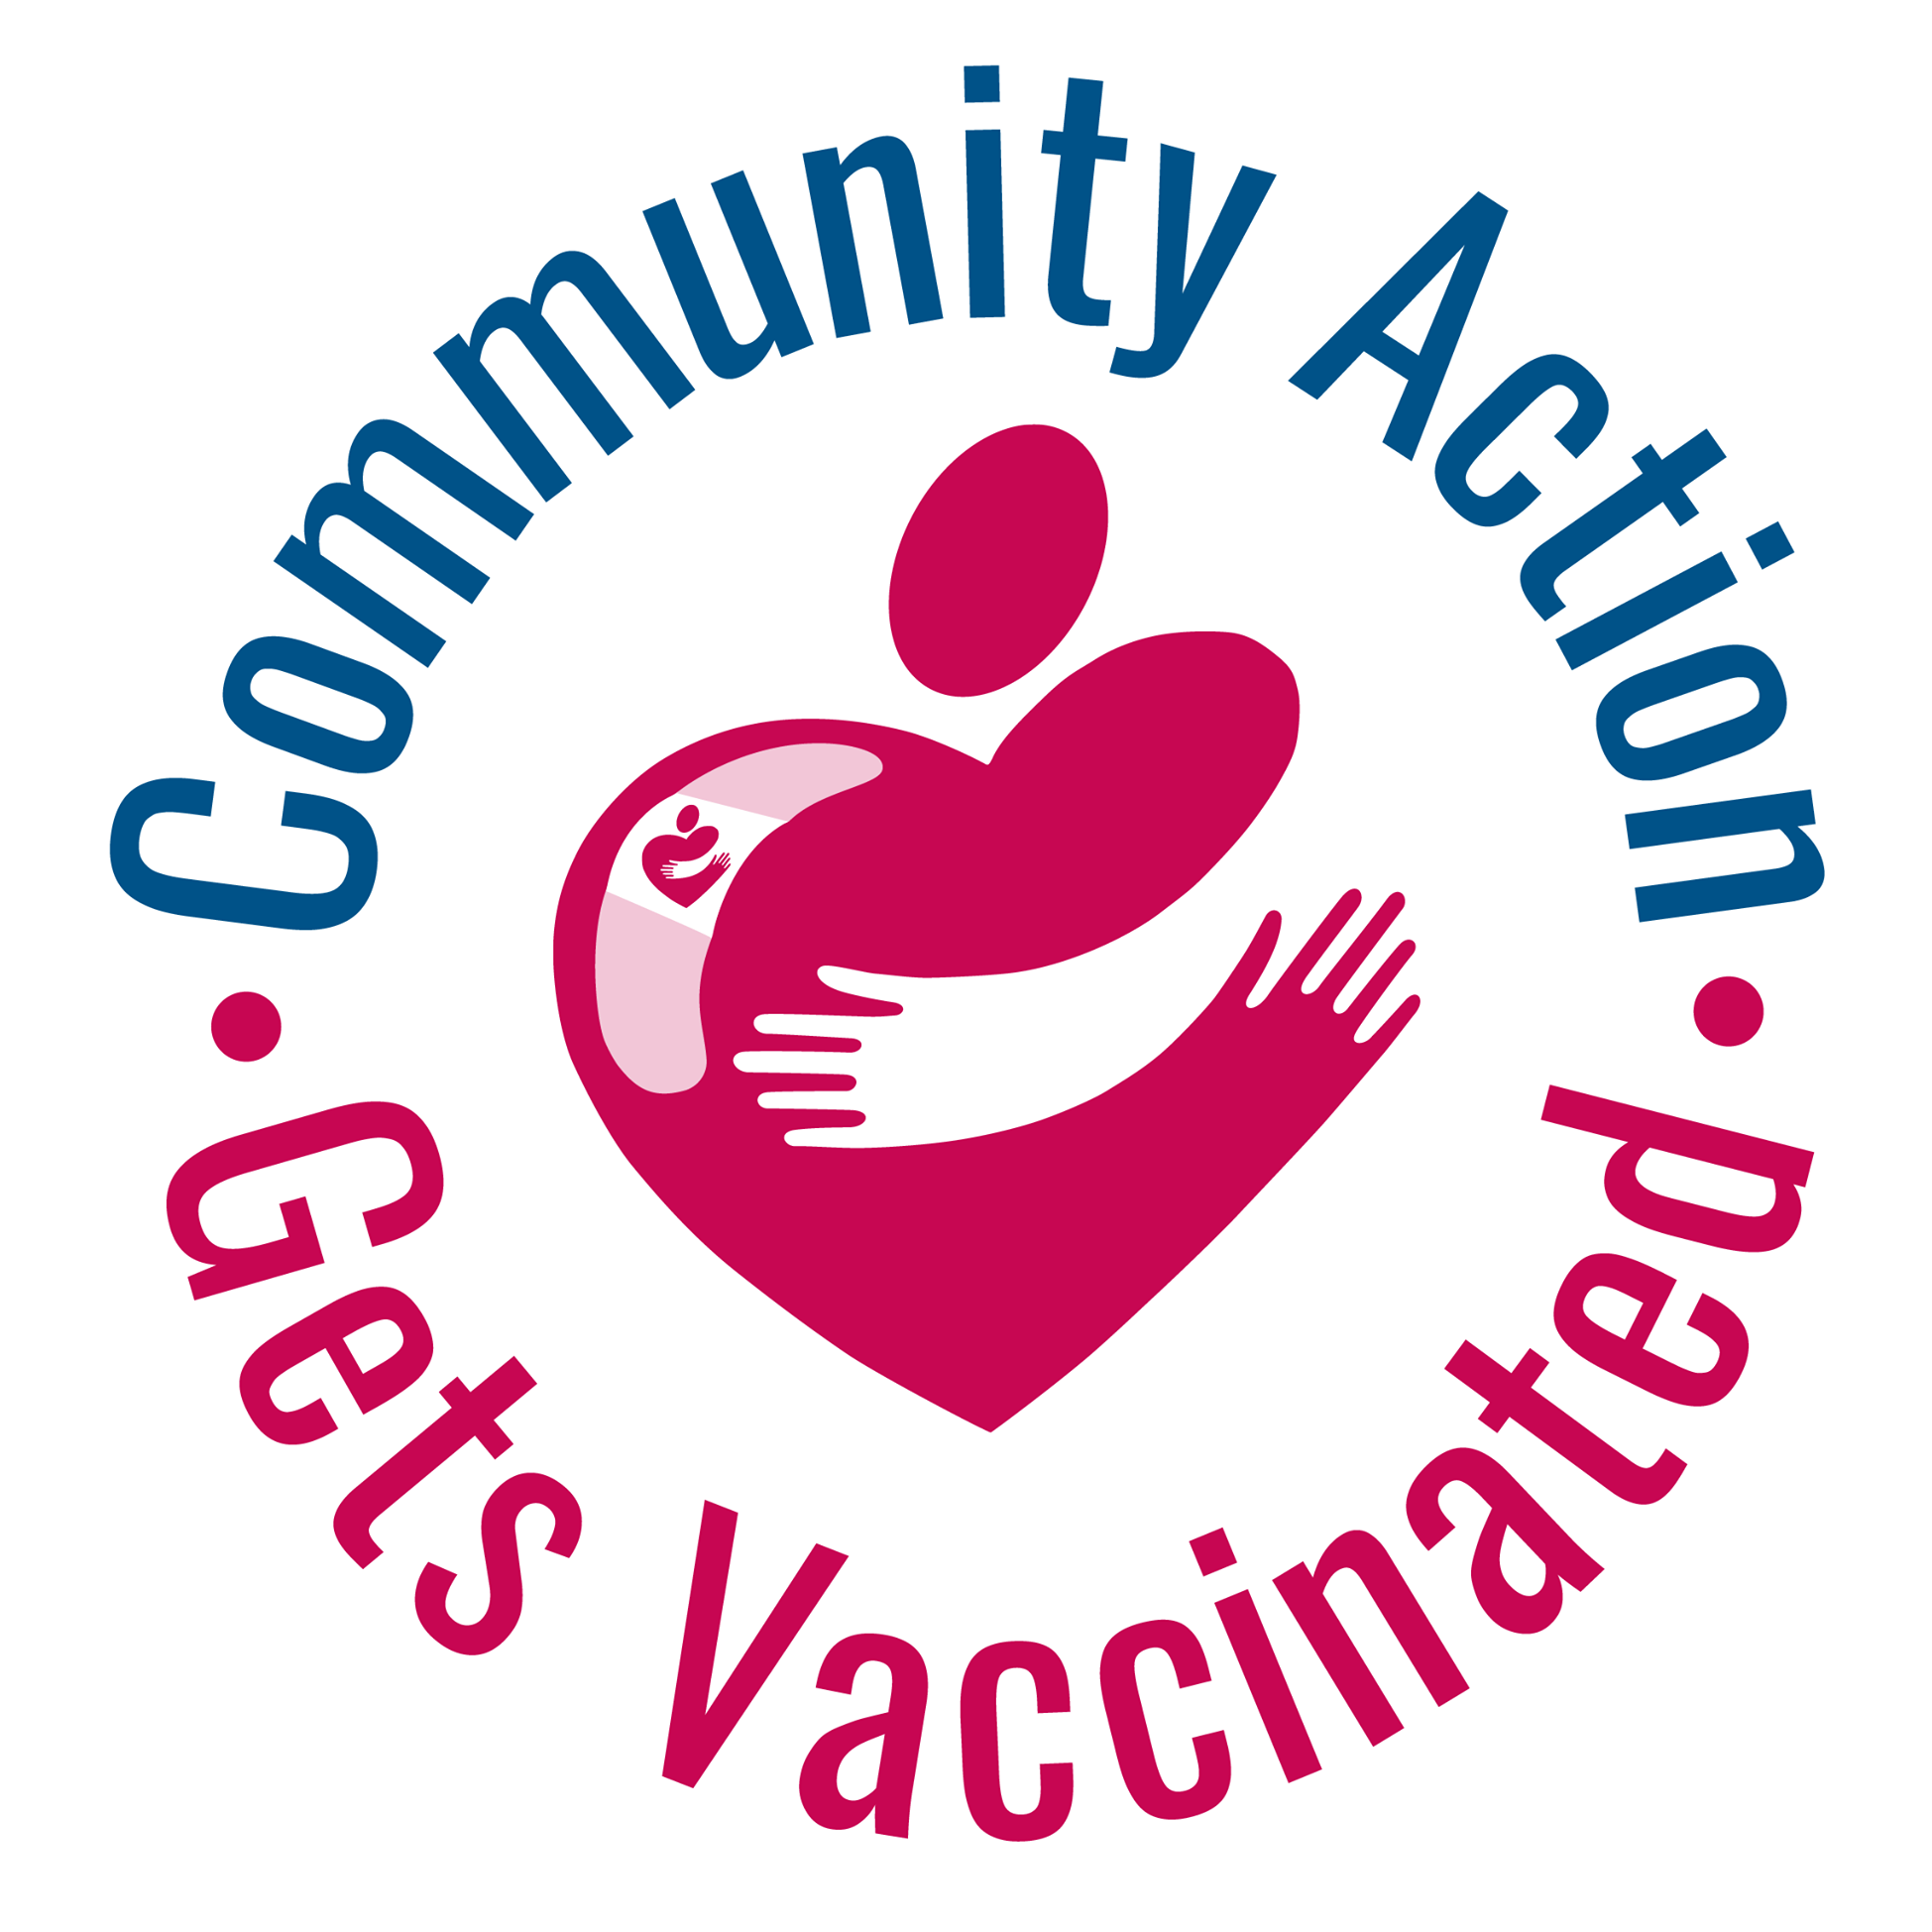 cap-vaccine-logo-english-blue-and-pink-lettering.png